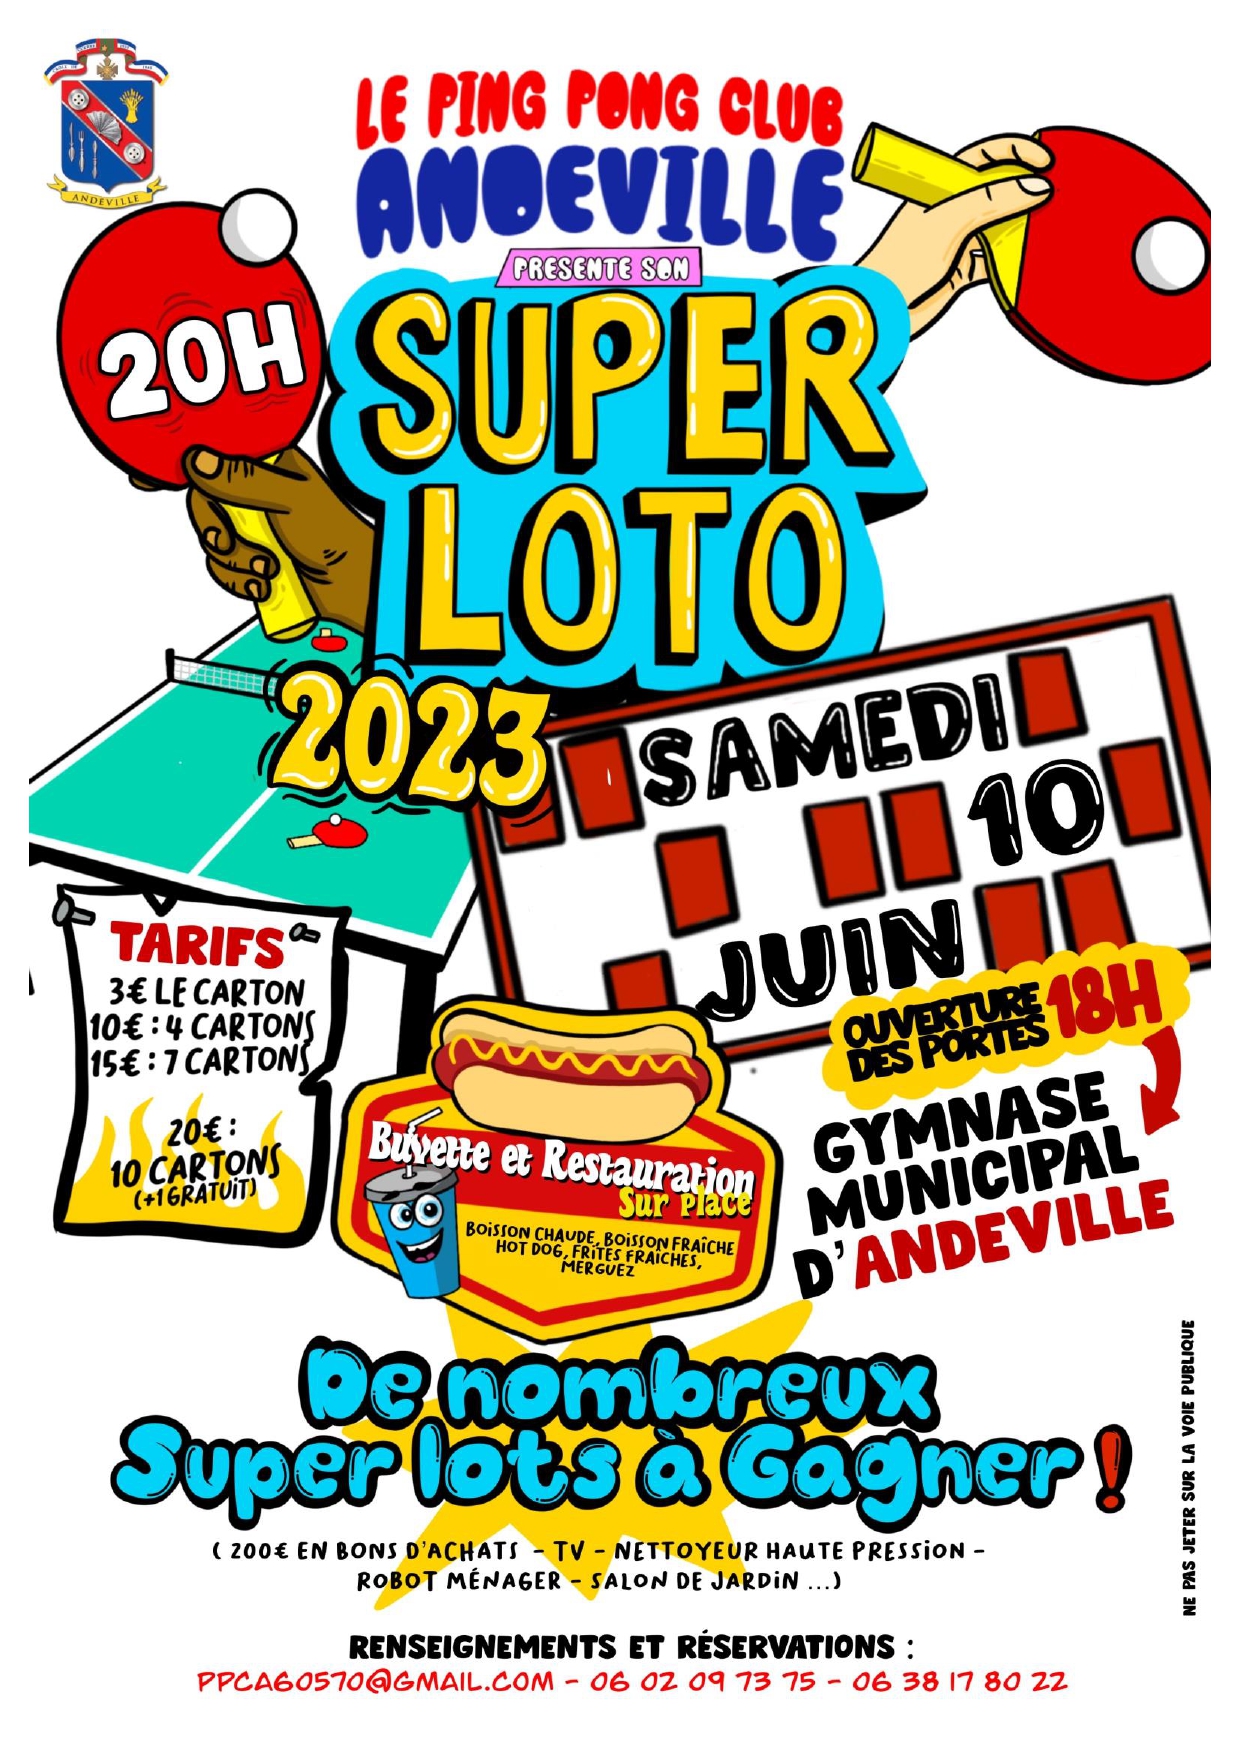 LOTO du Ping Pong Club D'Andeville